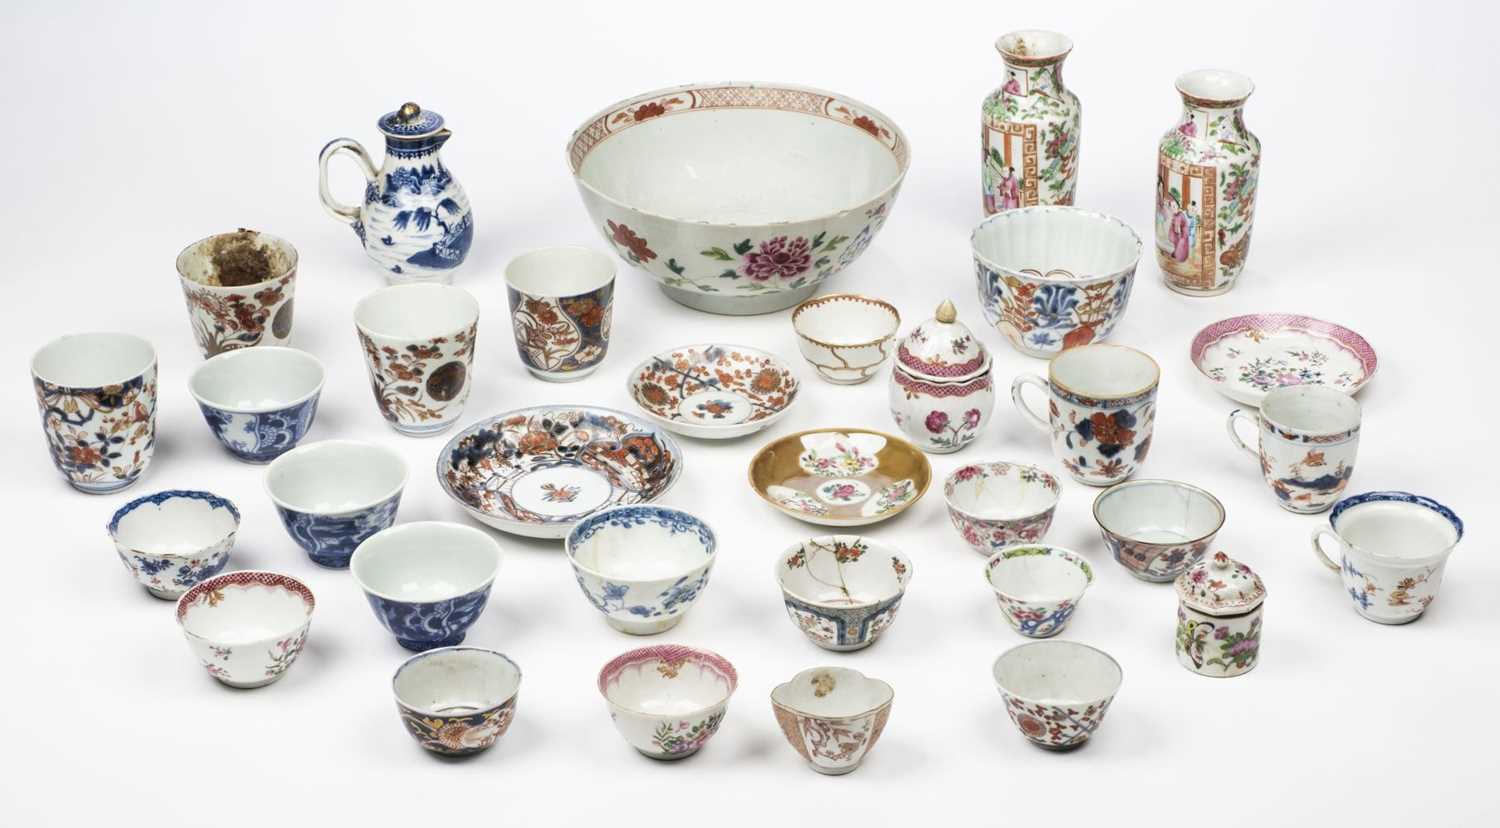 Lot 473 - Chinese Ceramics. A mixed collection of 18/19th-century Chinese ceramics